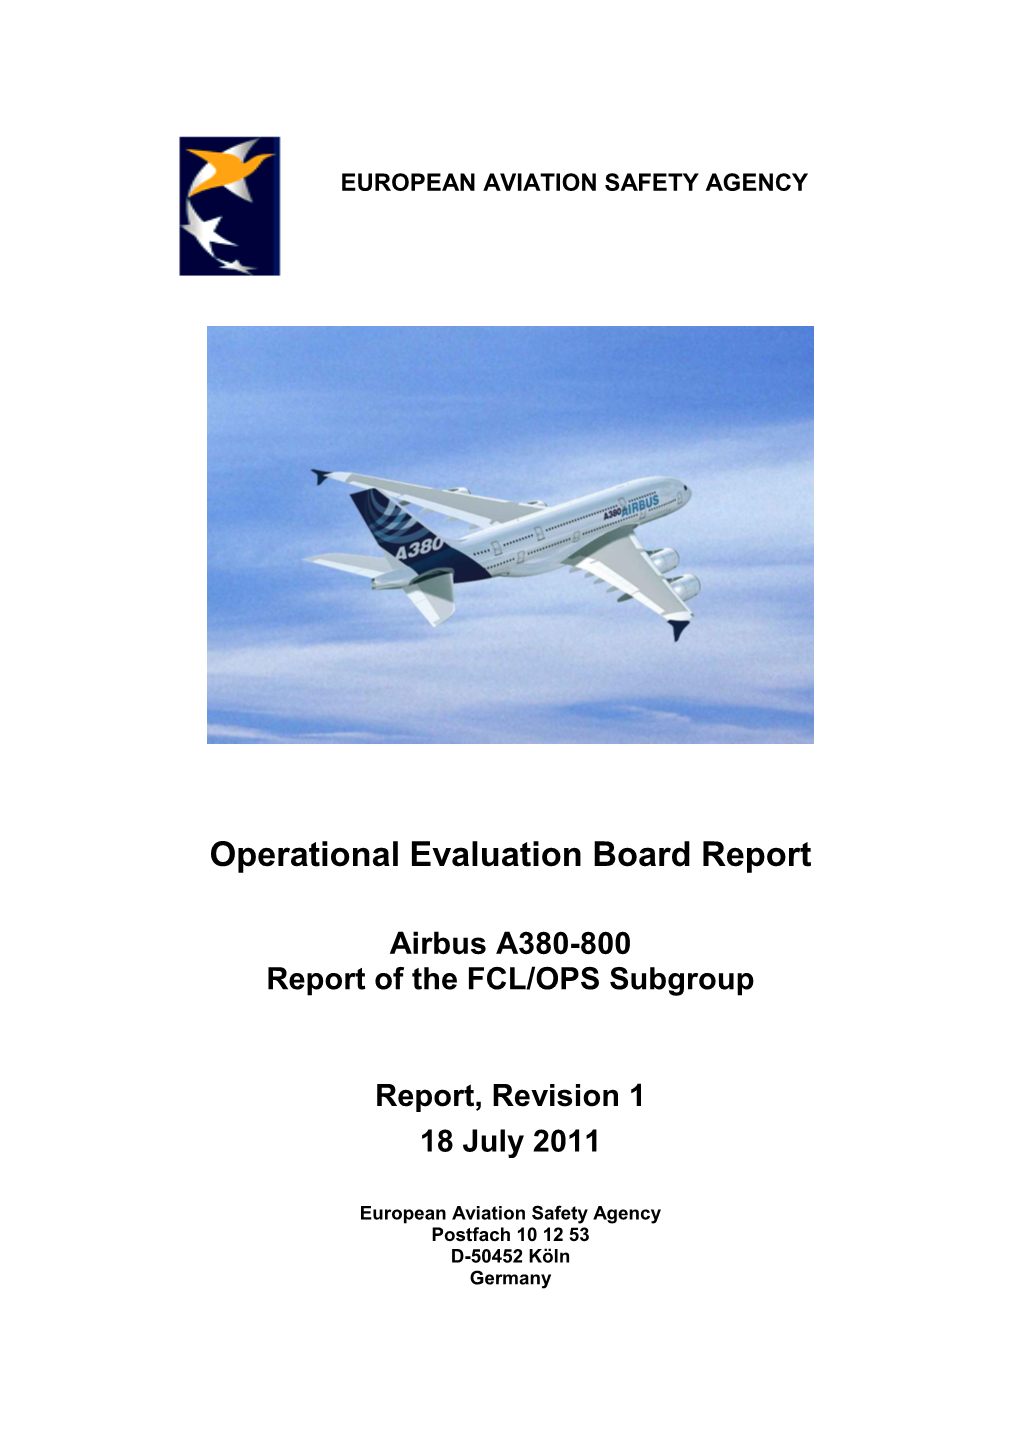 A380 Operational Evaluation